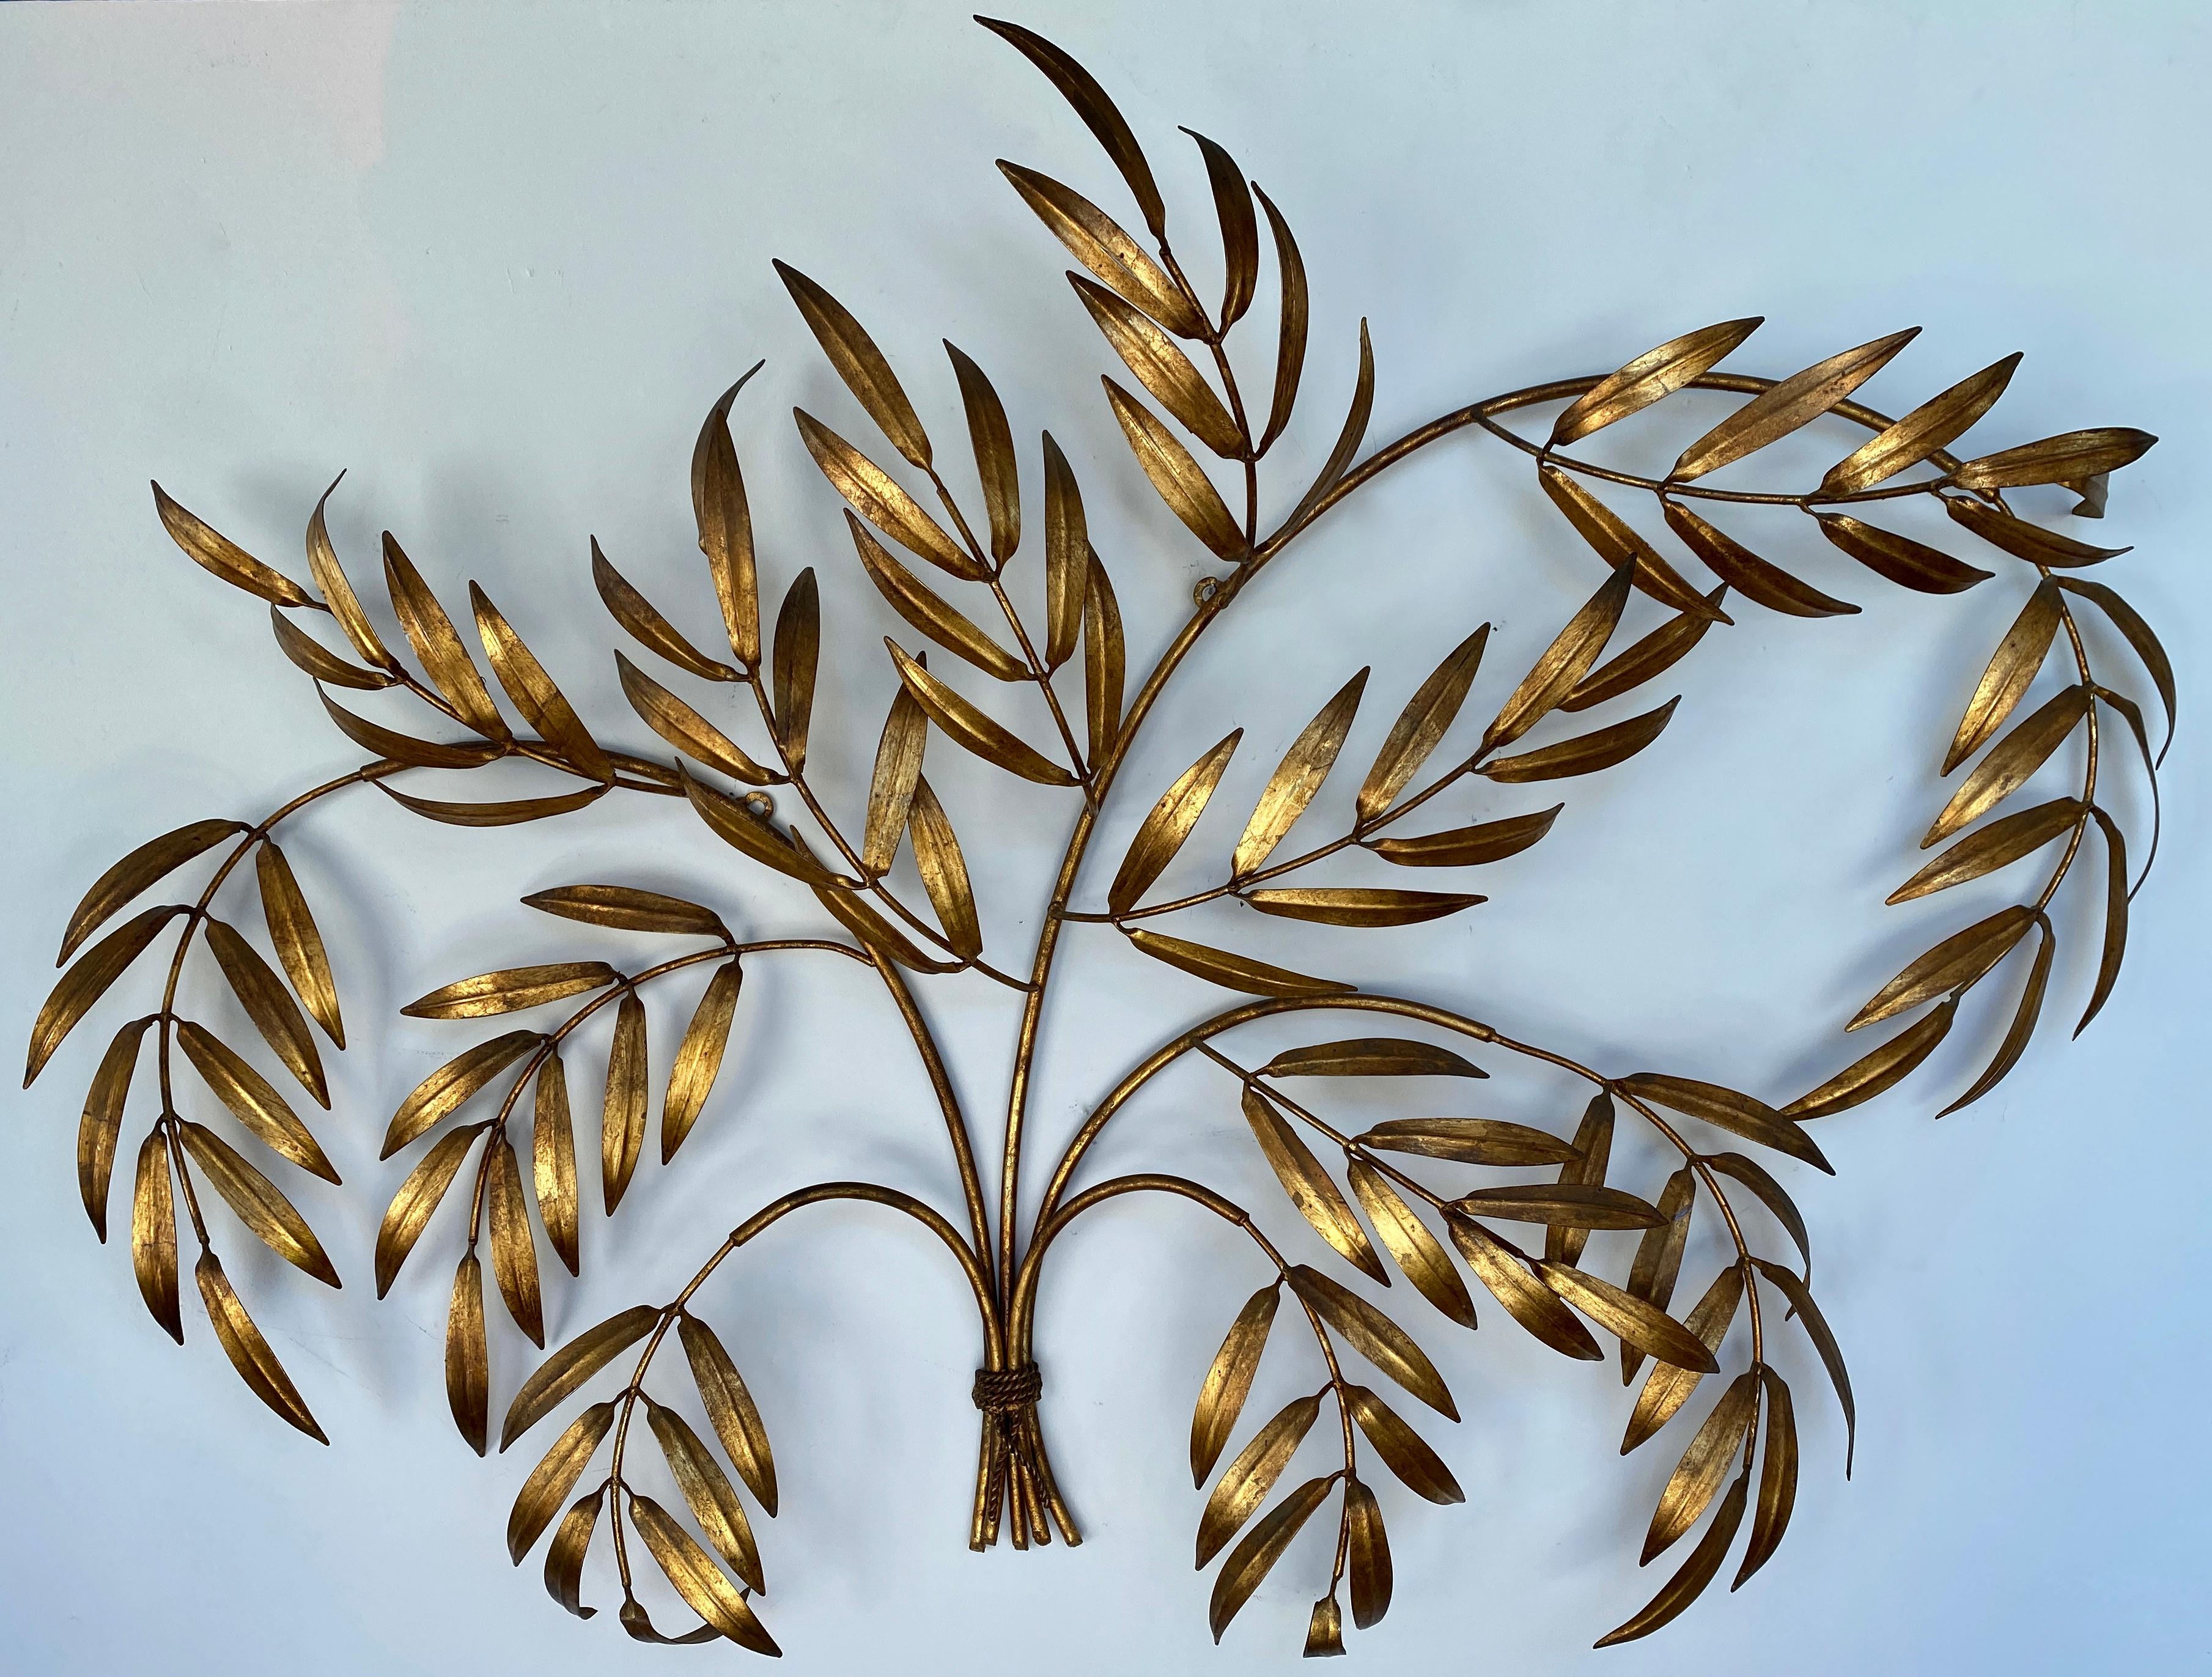 A monumental Italian gilded wall sculpture, starting from it's base of 5 branches tided together by a gilded metal cord, branches then are radiating outward that then turn into 13 branches.